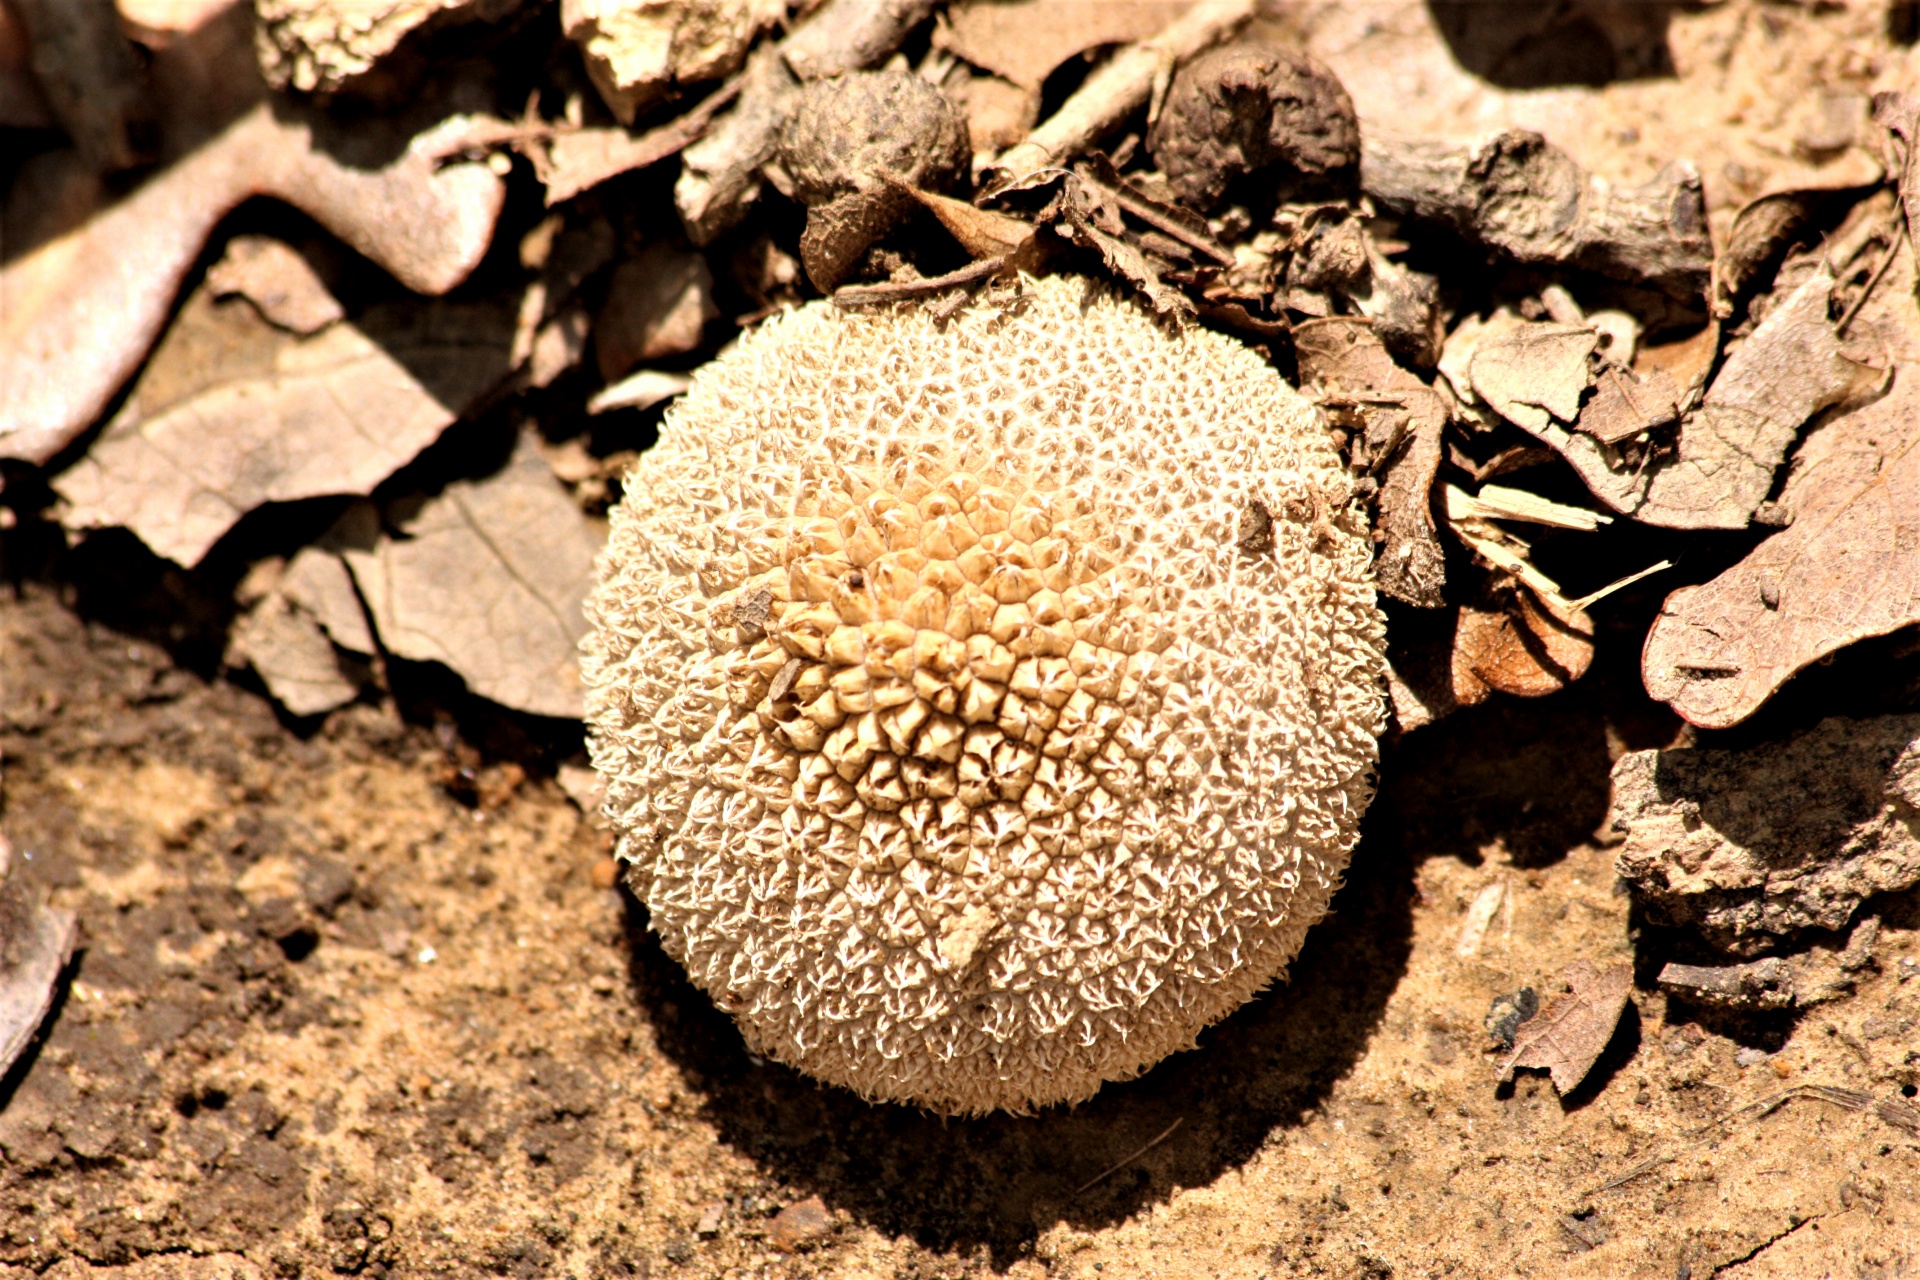 A light brown spiny puffball mushroom growing at the edge of fallen leaves in the woods.